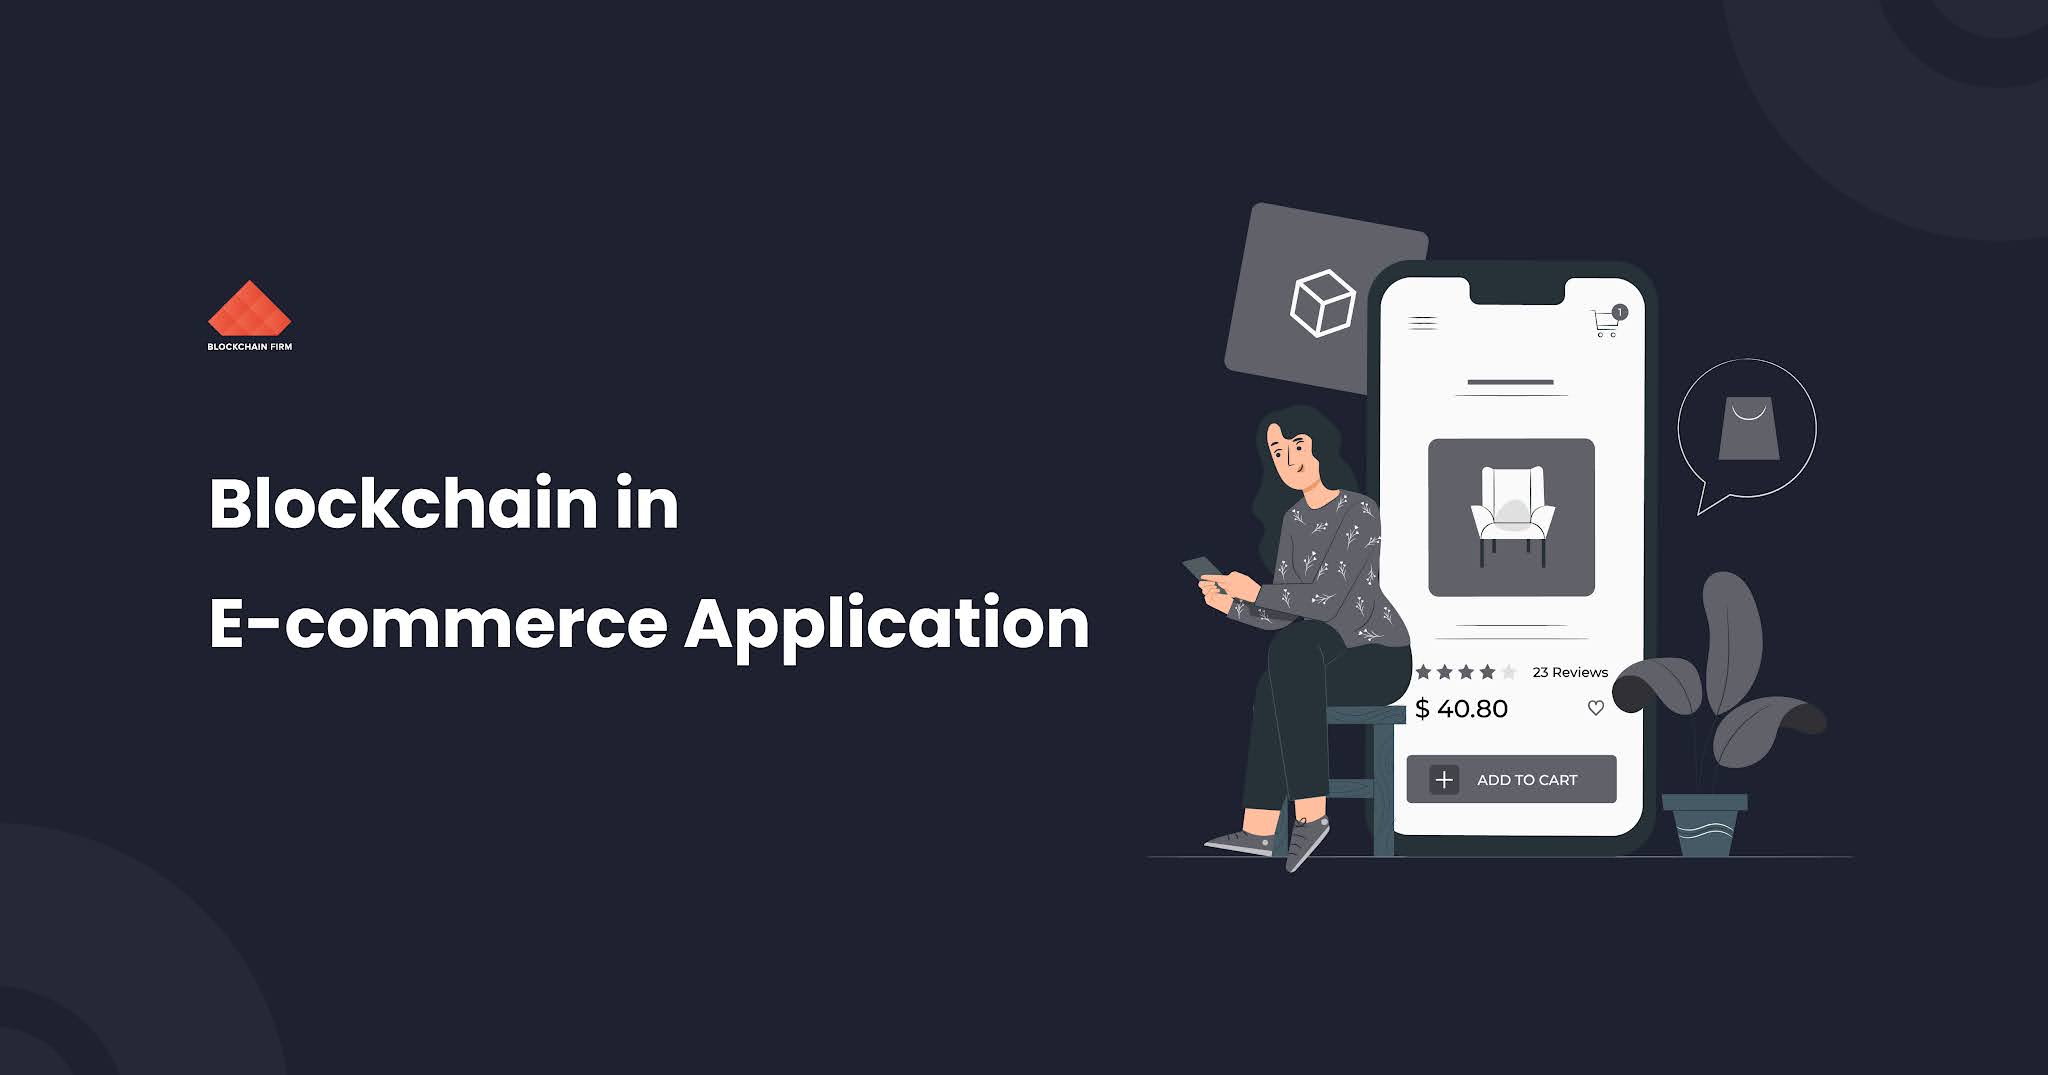 Applications of Blockchain in ecommerce